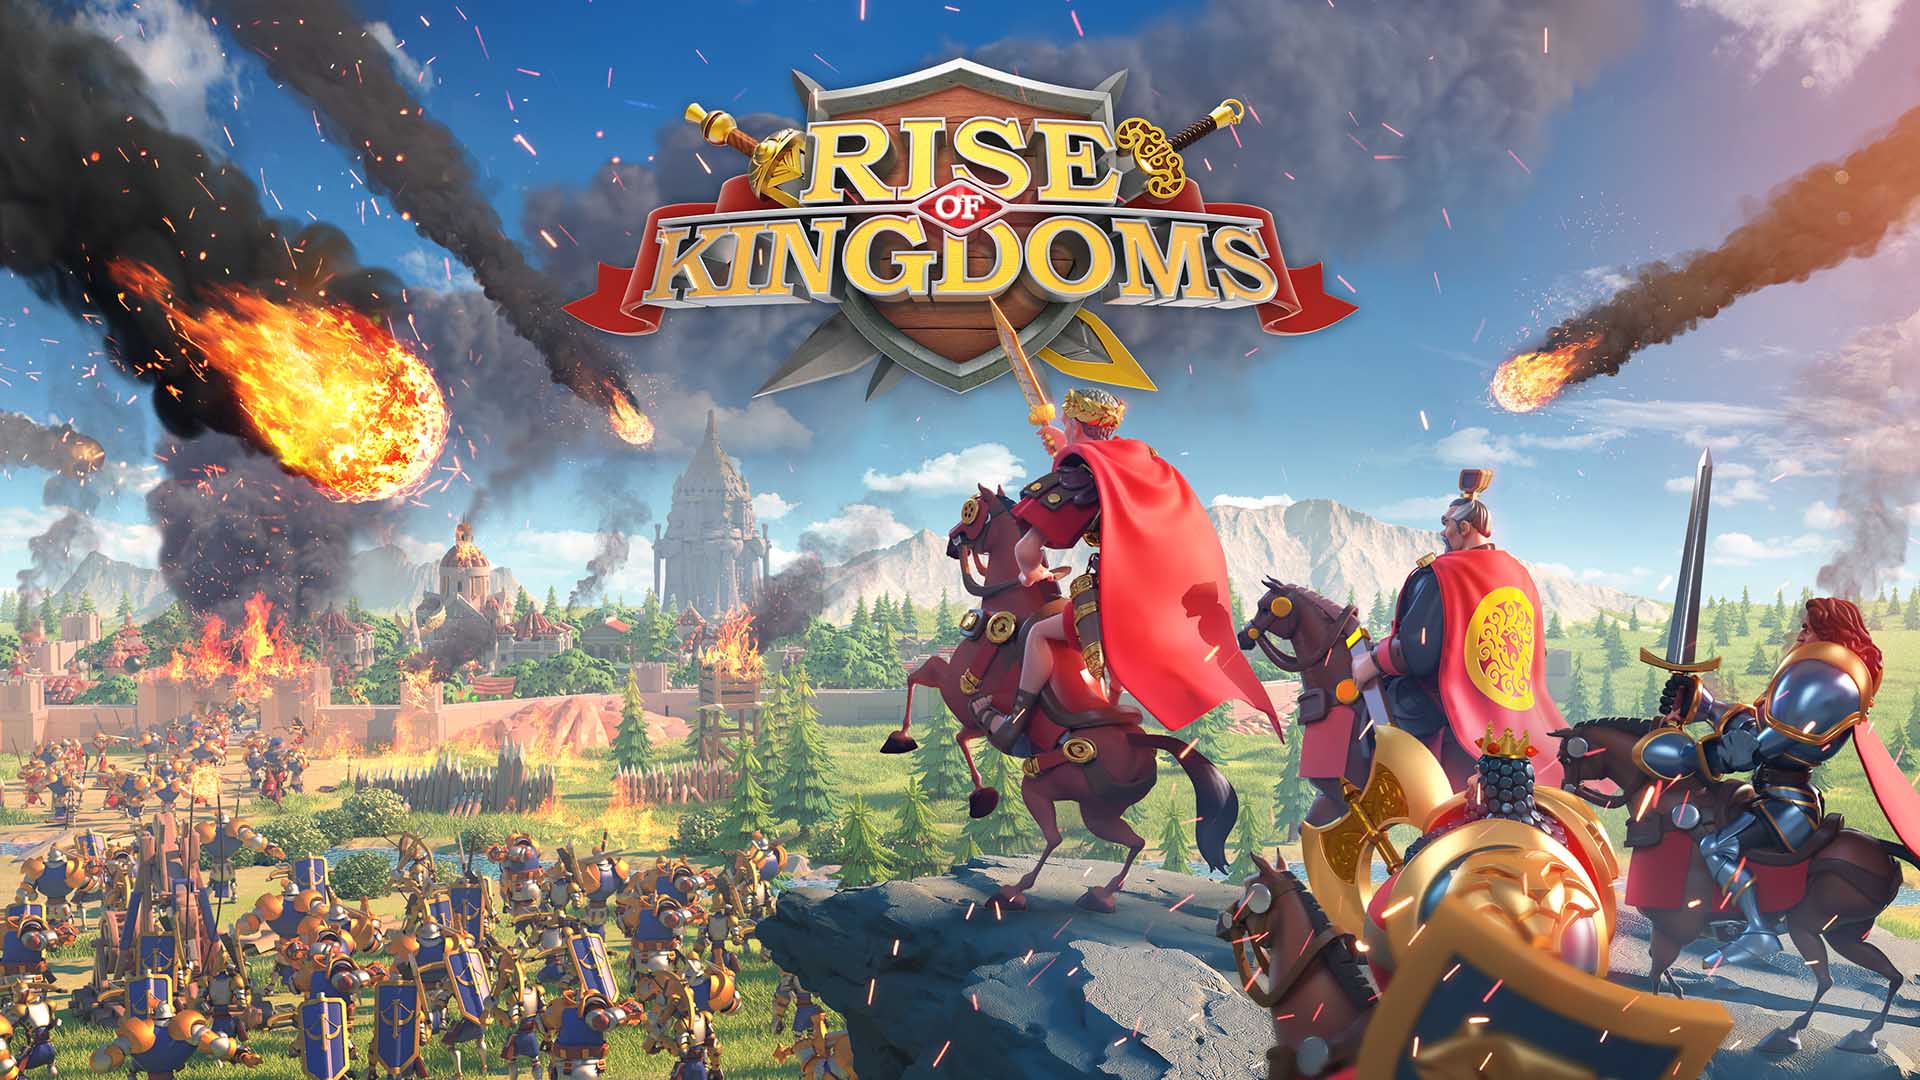 Multiple Alliances of the Same People Rise of Kingdoms Wiki Community